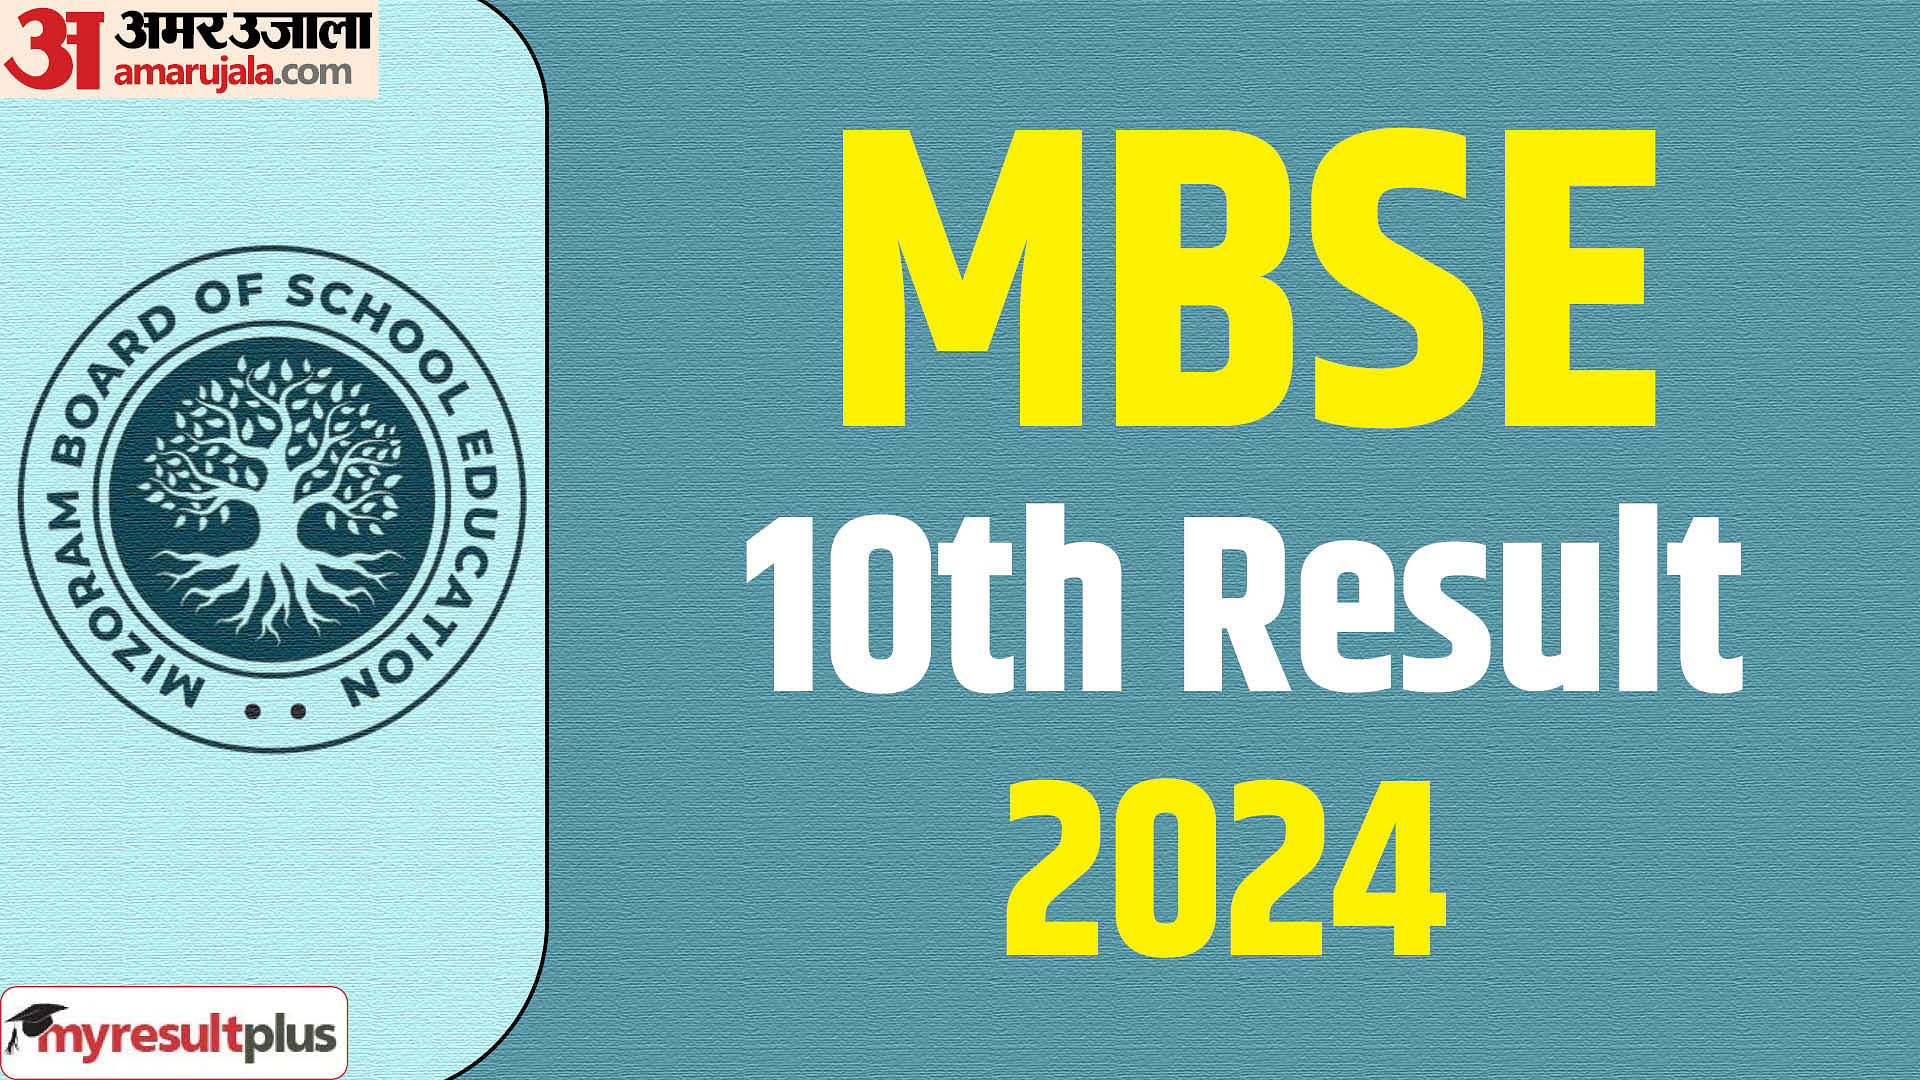 MBSE HSLC results announced, Boys outshone girls in Mizoram's class 10 board examination